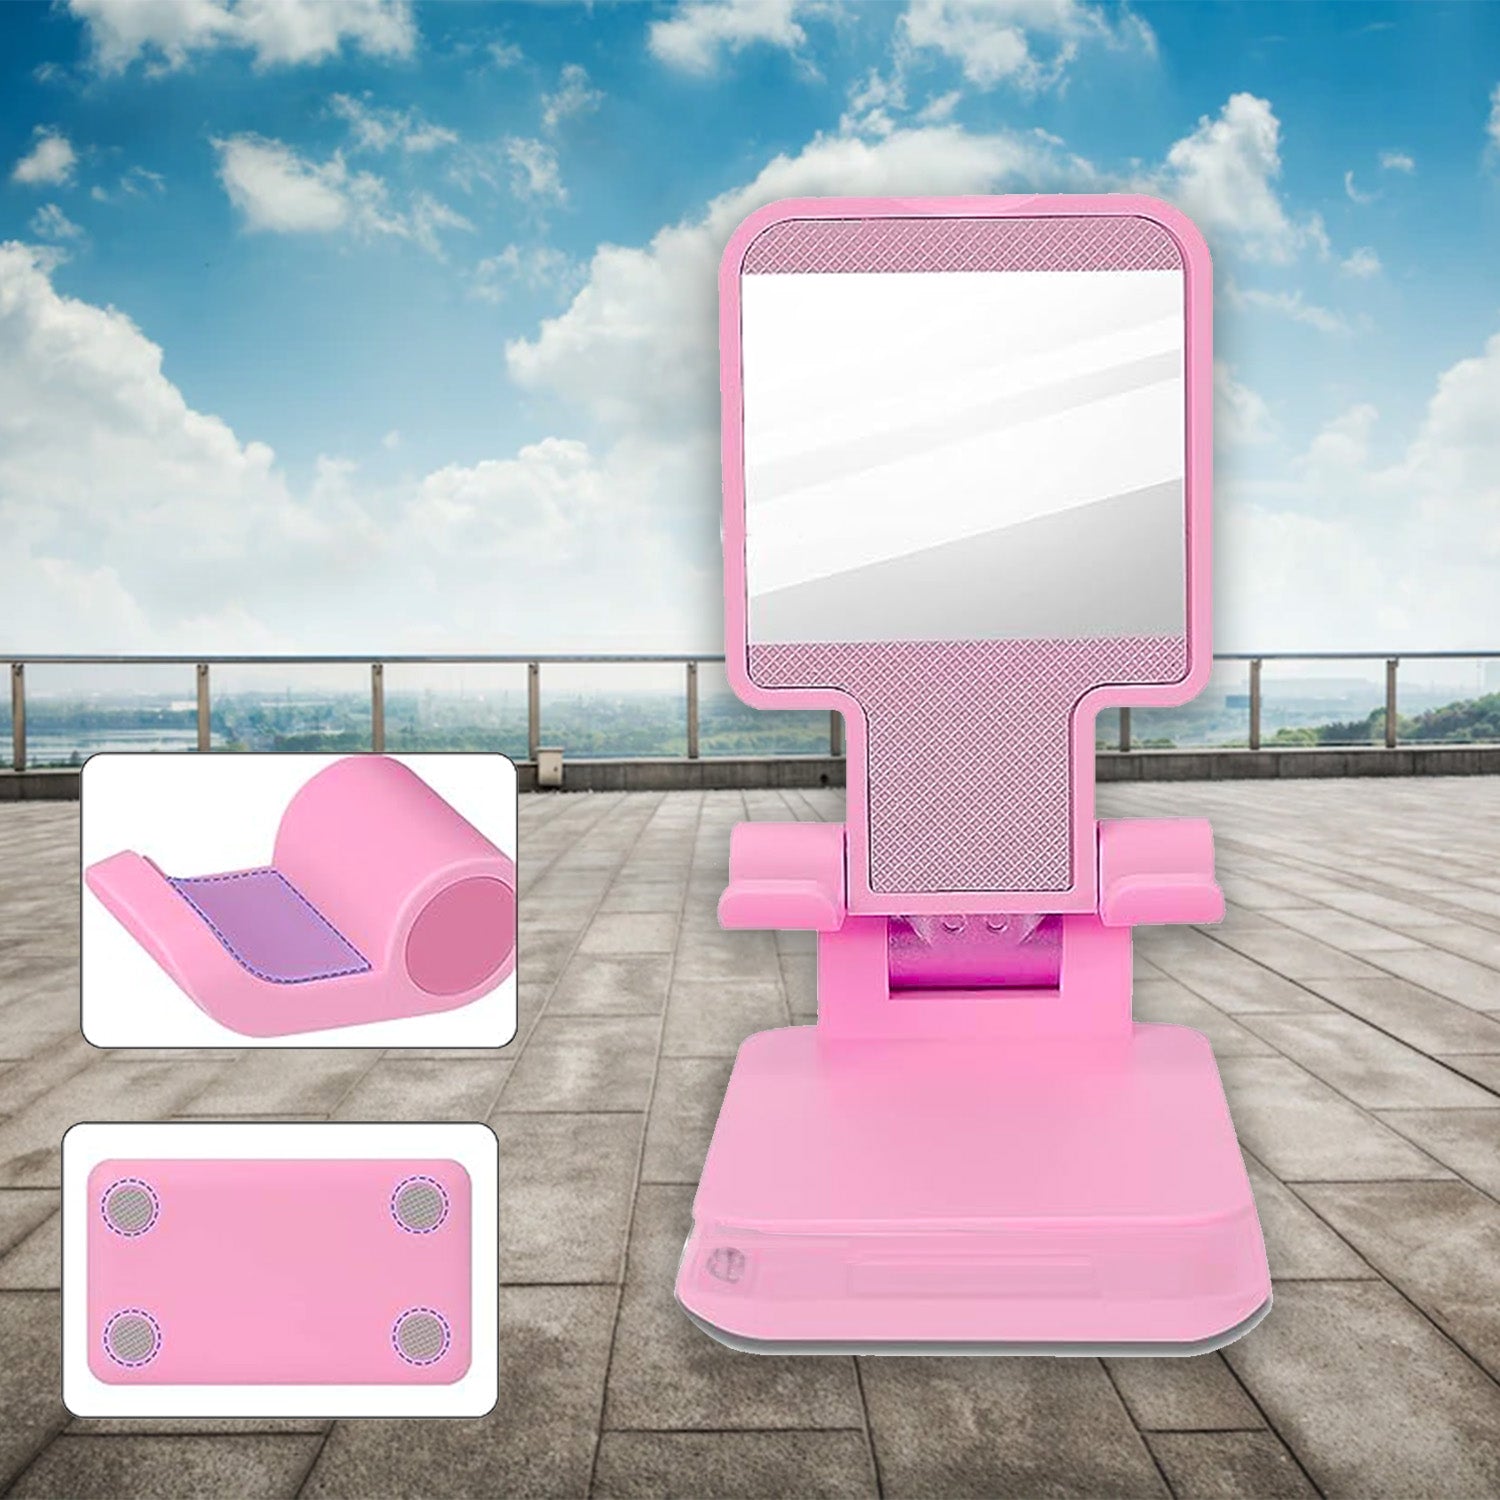 3-Way Adjustable Phone Stand with Mirror for Desktop Organization